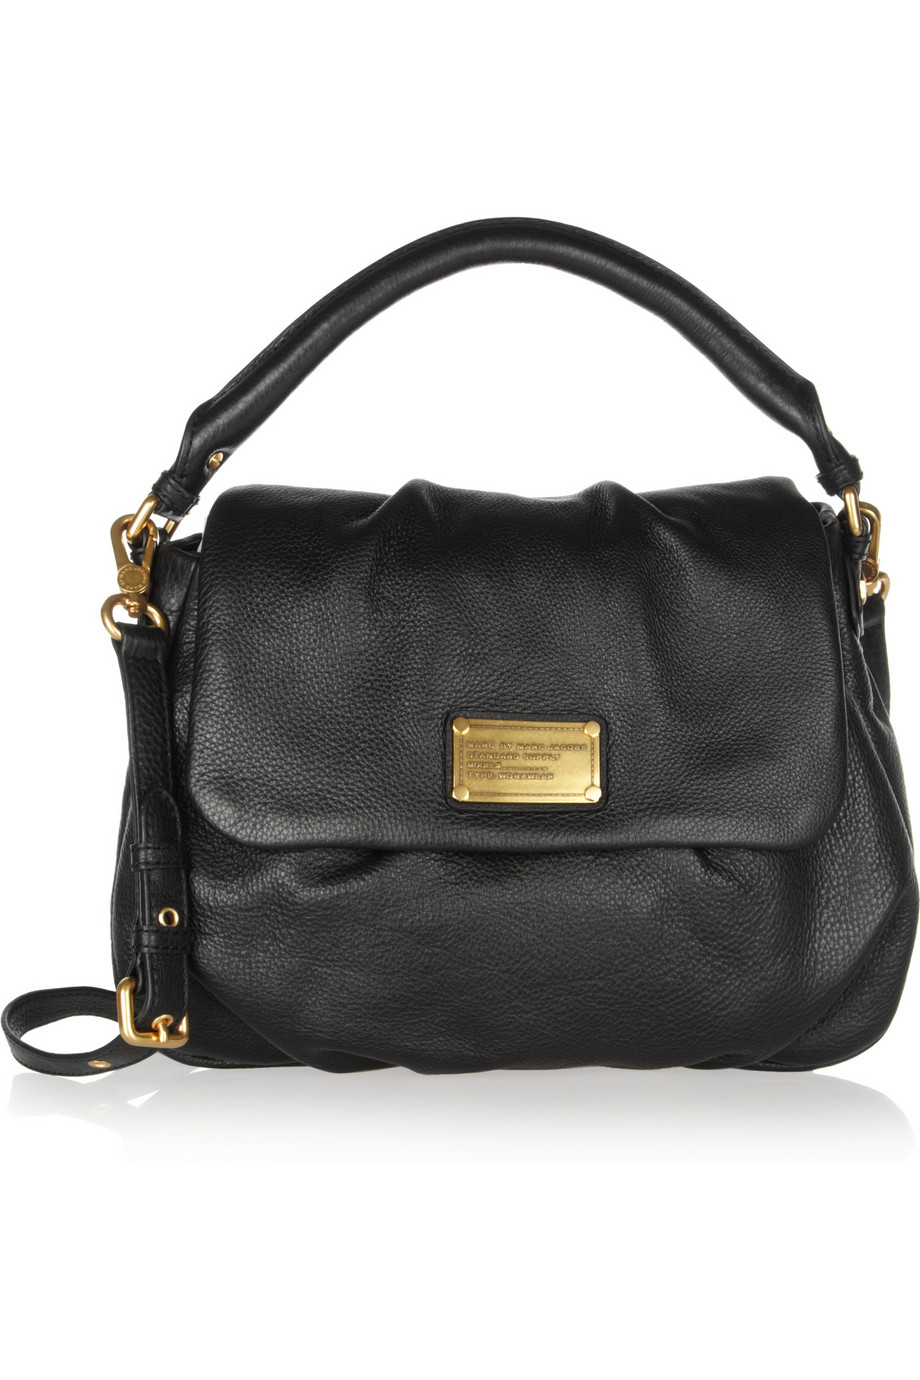 Lyst - Marc by marc jacobs Classic Q Lil Ukita Textured-Leather Shoulder Bag in Black